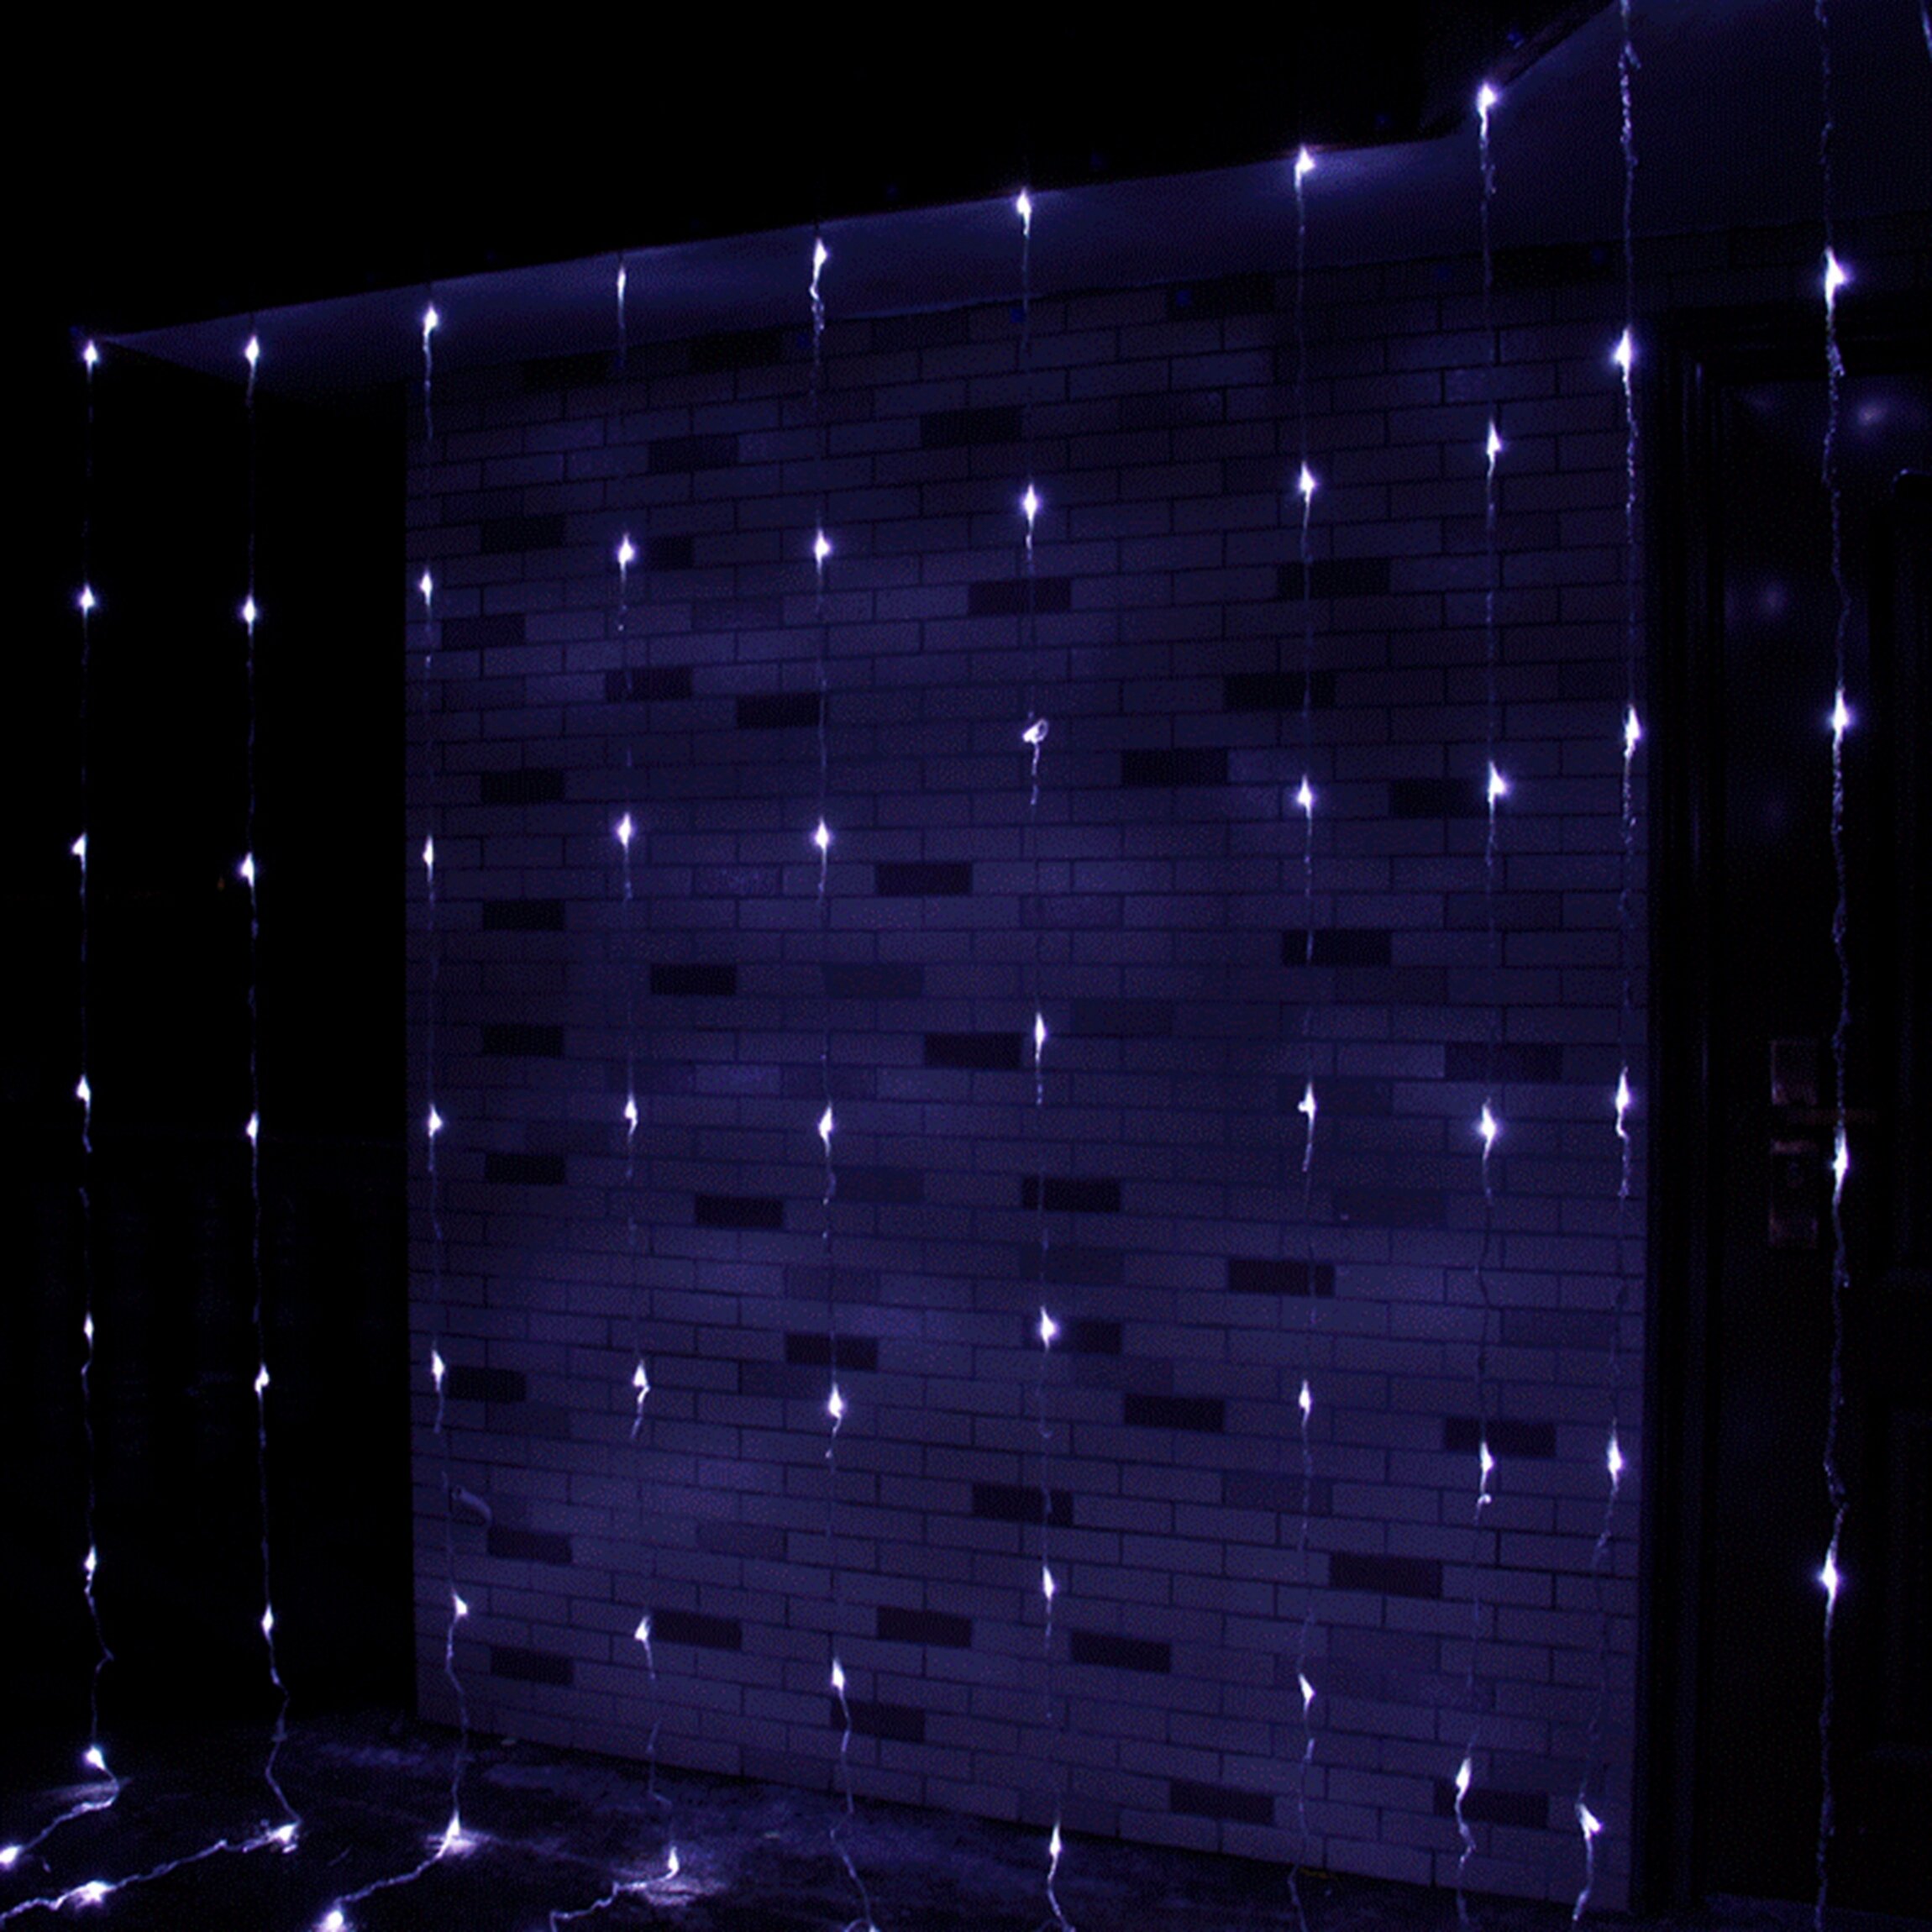 Details about   138 LED Twinkle Star Curtain Window Fairy Lights Christmas Party Wedding Decor 